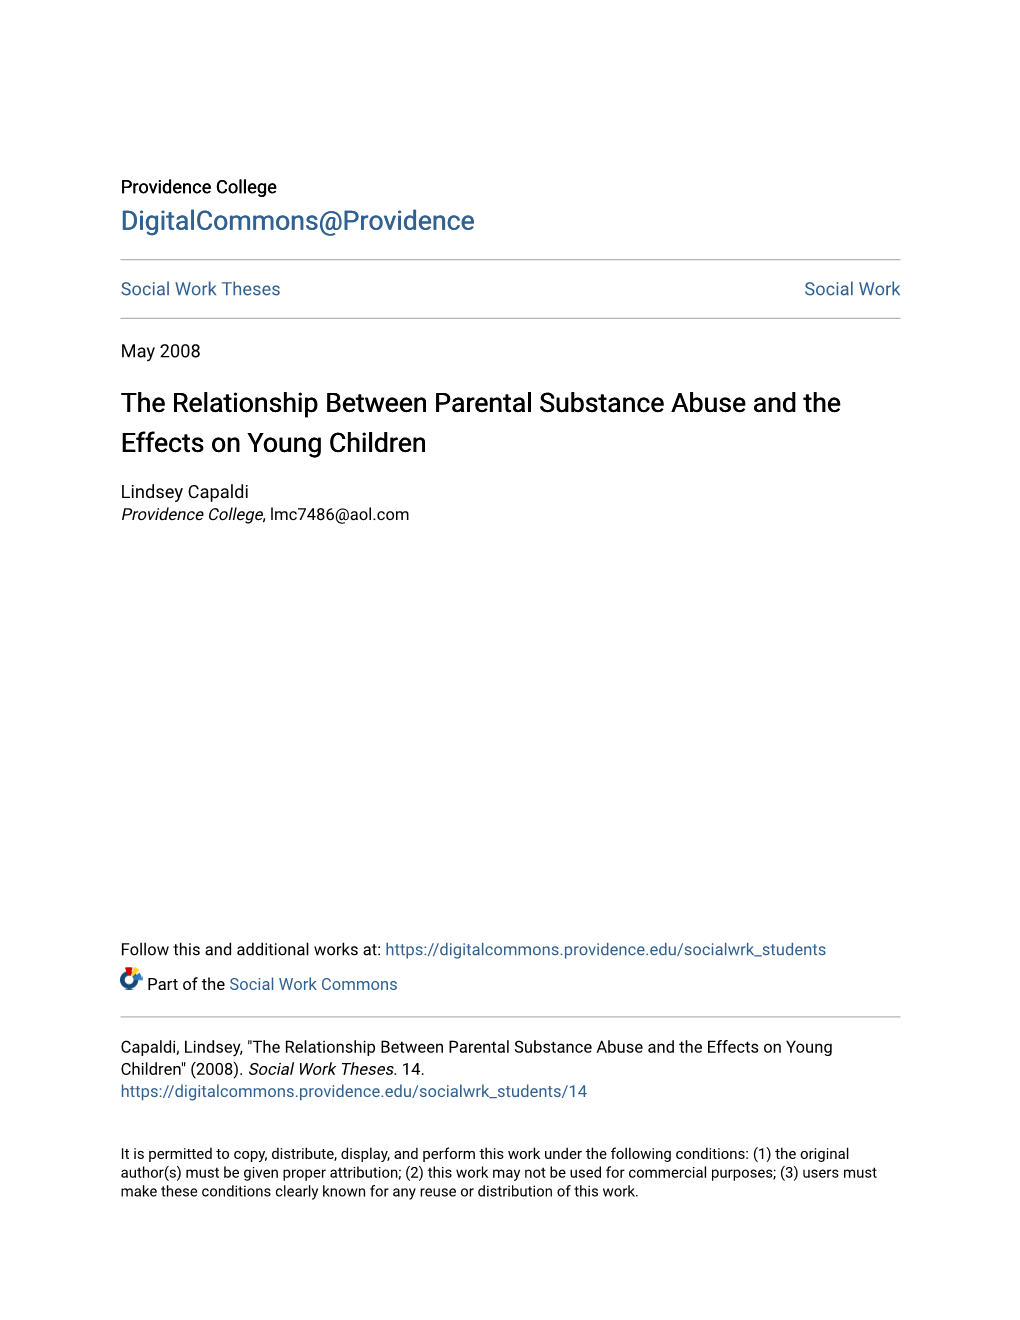 The Relationship Between Parental Substance Abuse and the Effects on Young Children